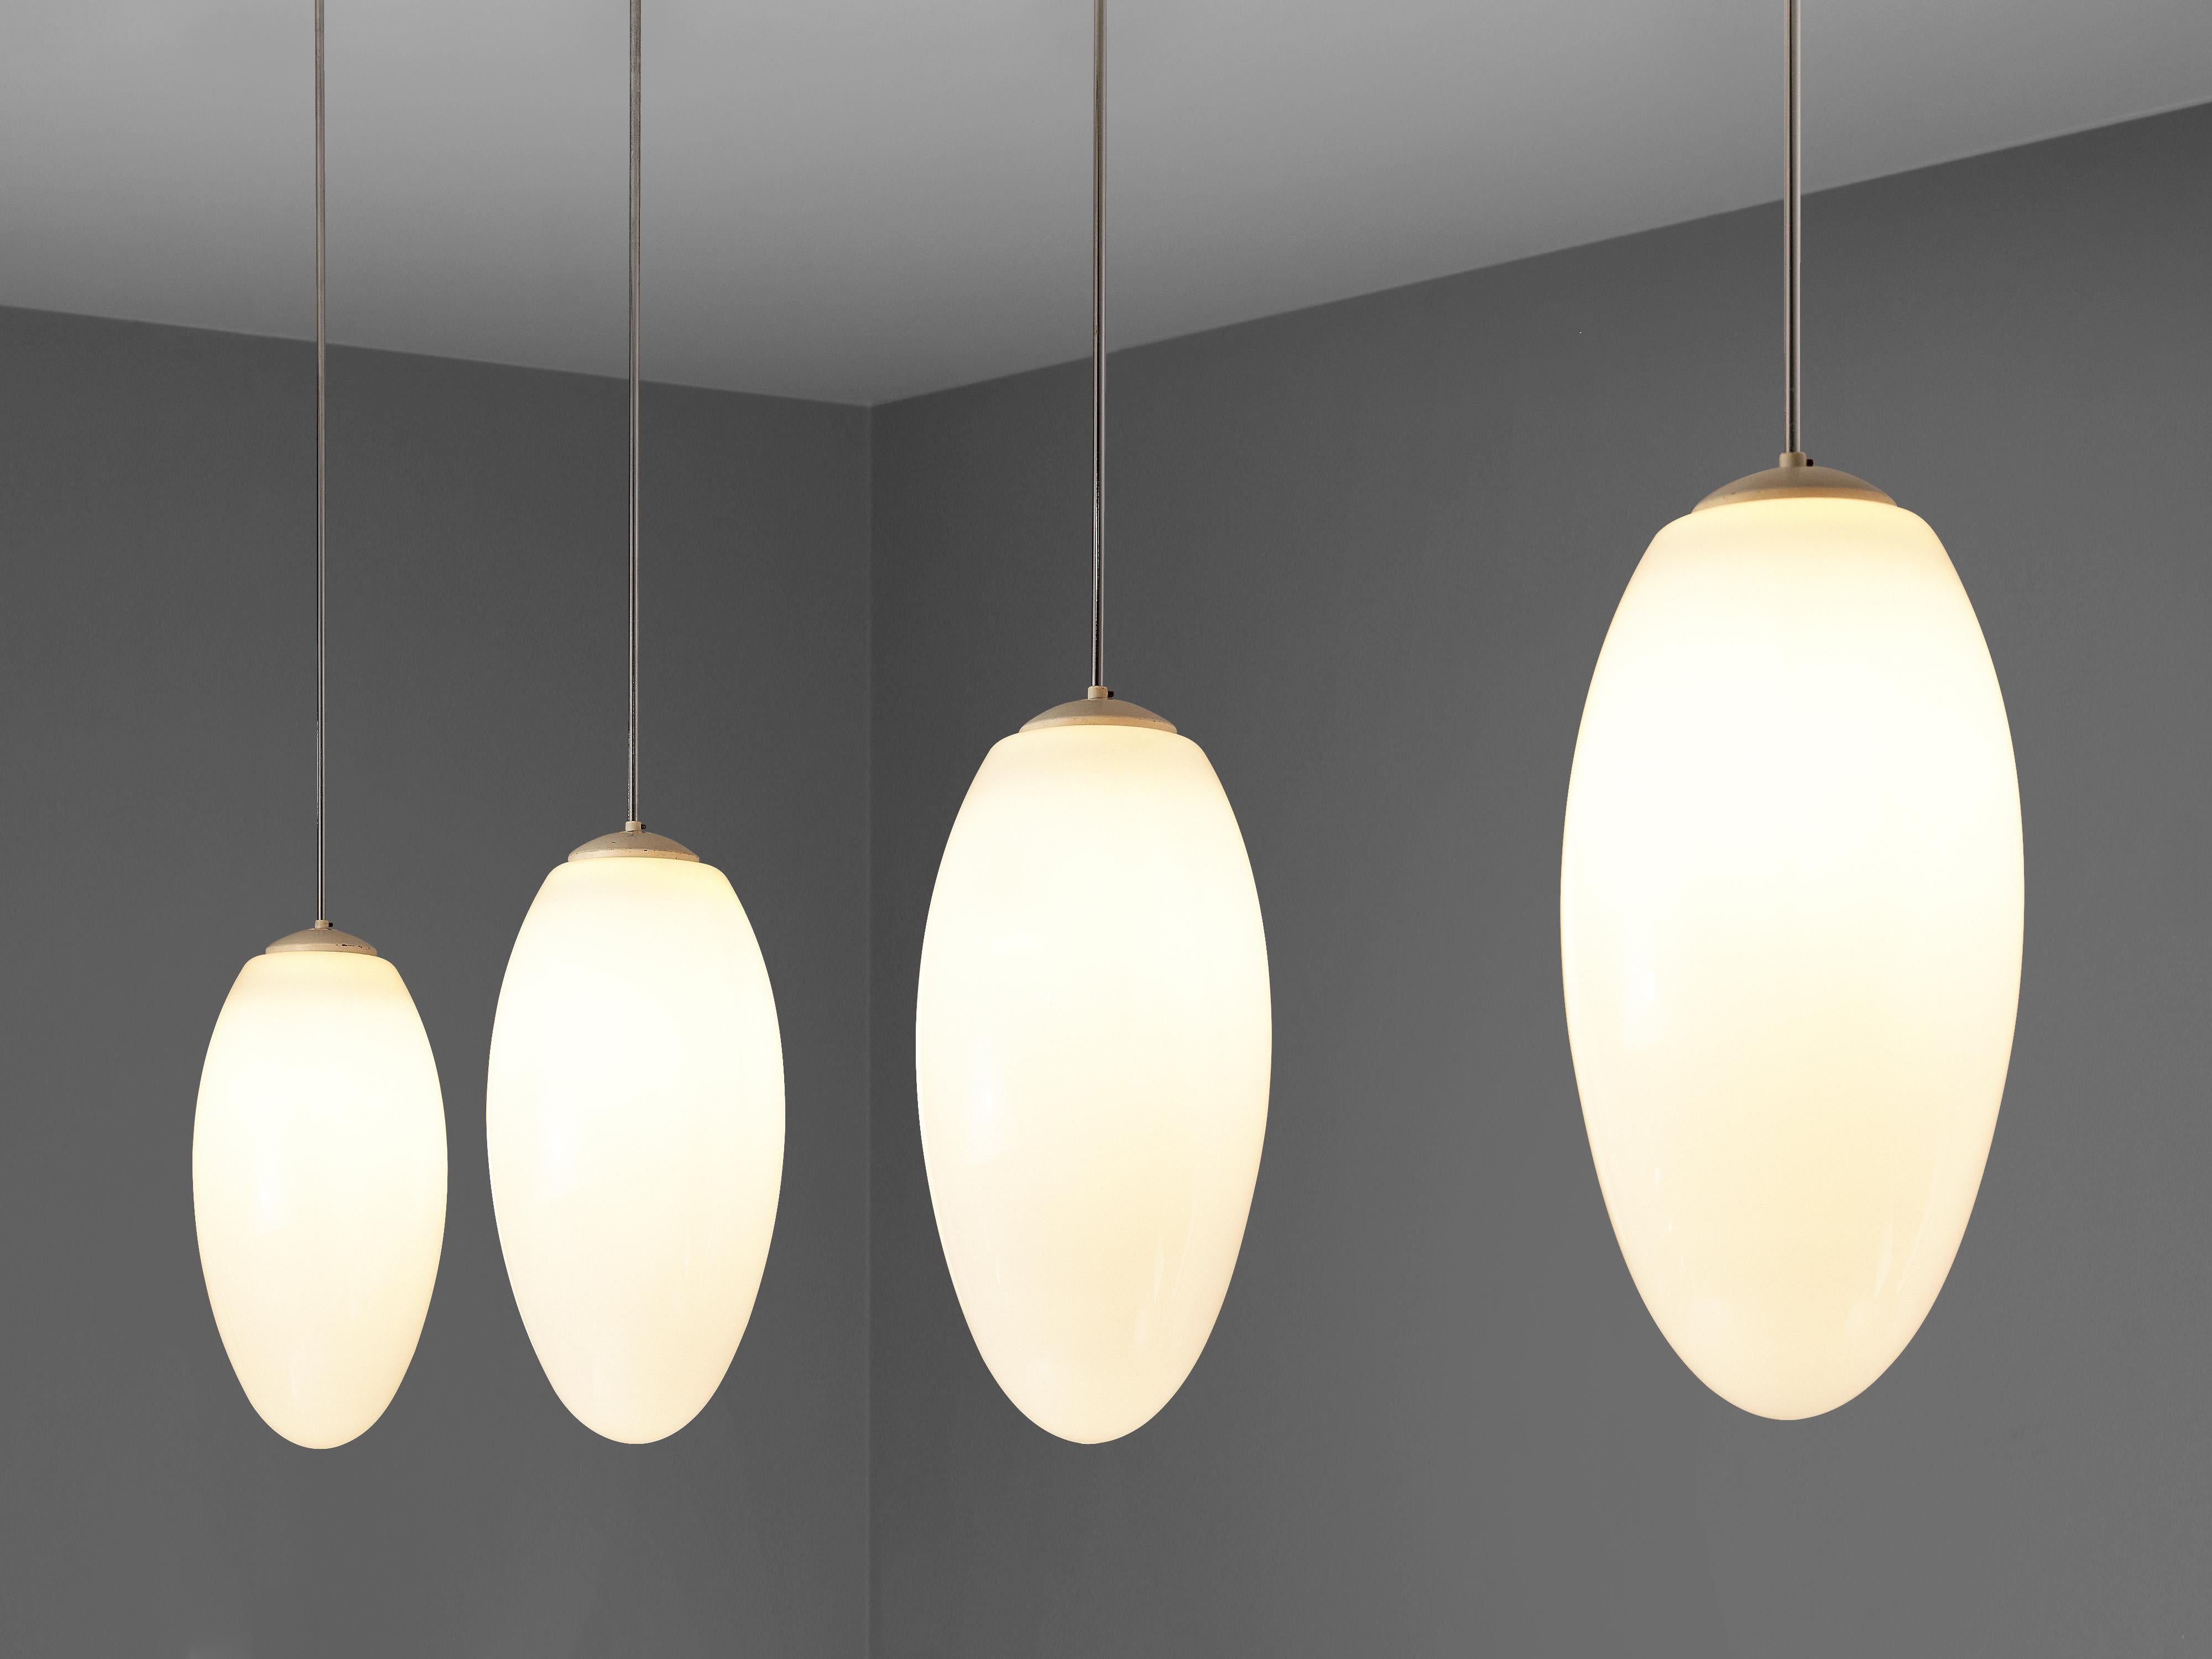 Pendant lamps, metal, opaline glass, plastic, Europe, 1970s

Beautiful in their design and displaying an understated elegance: minimalist pendant lamps adorned with drop-shaped glass shades. Suspended delicately from metal stems culminating in